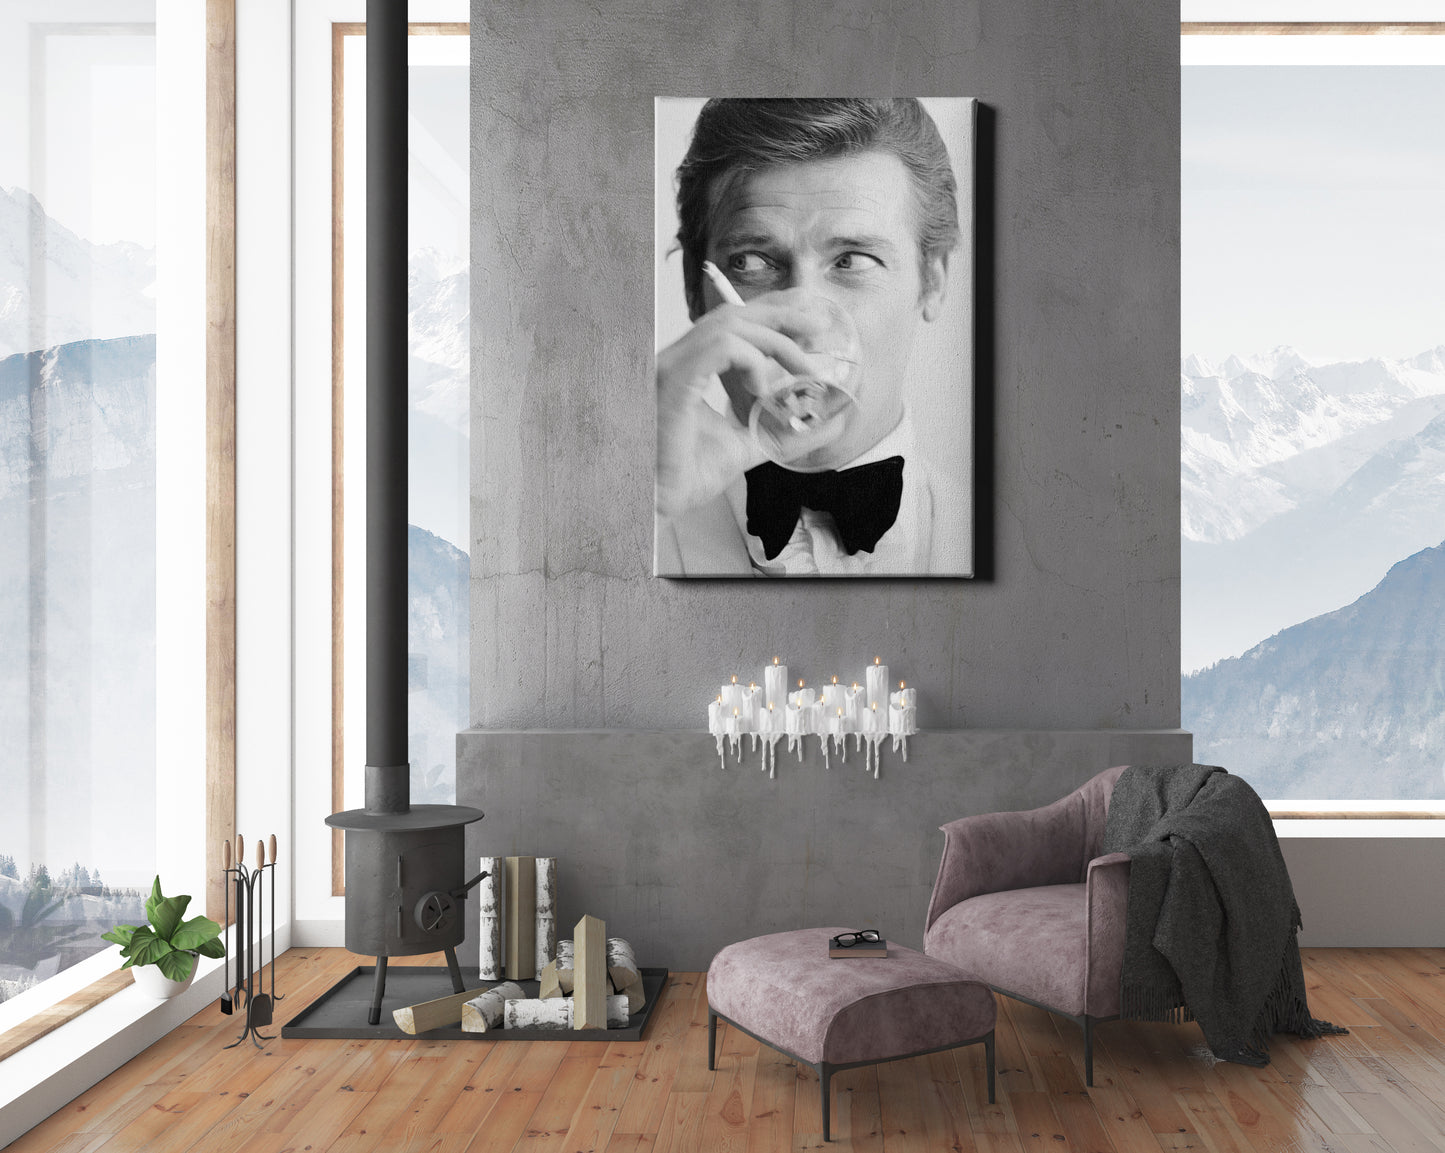 Roger Moore Poster Actor James Bond Smoking Hand Made Poster Canvas Print Wall Art Home Decor